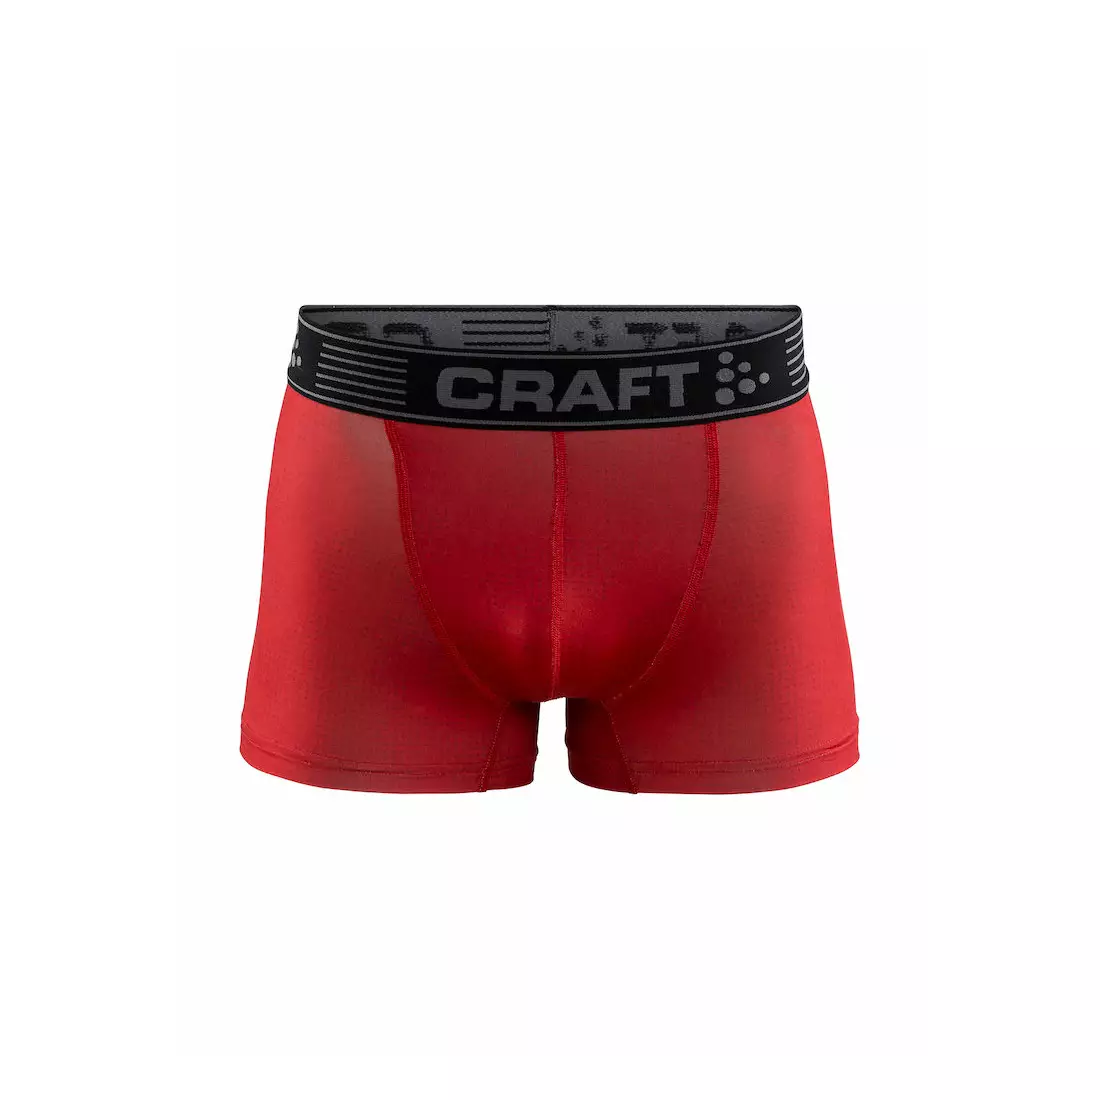 CRAFT men's sports boxer shorts 3-INCH 1905488-2432